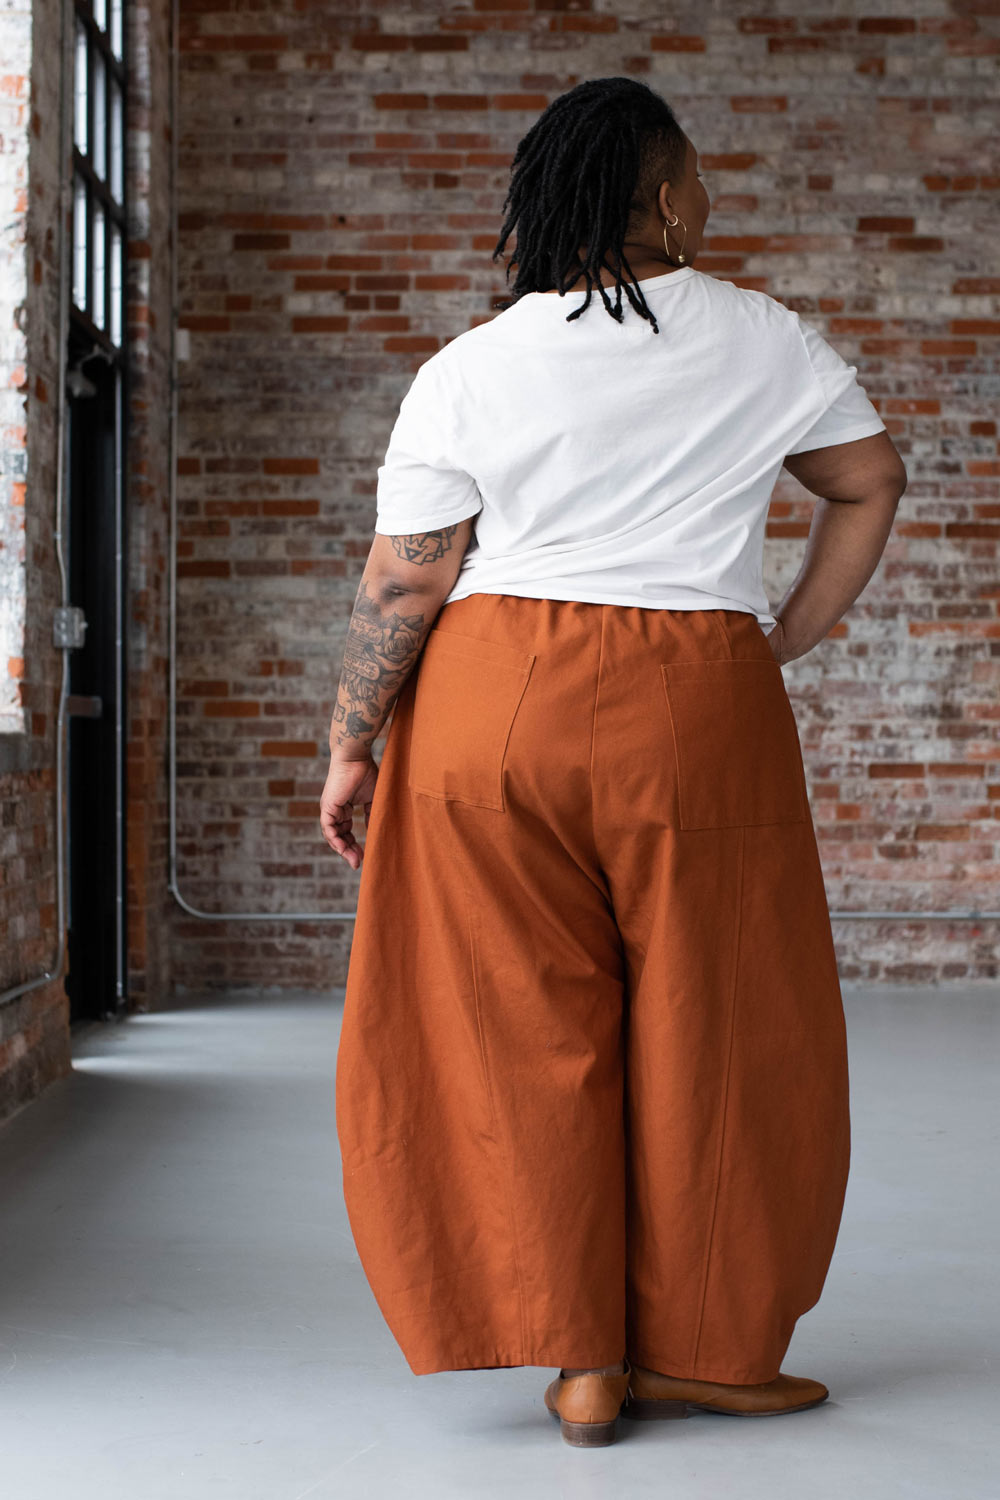 Ashley is wearing pumpkin orange Arthur pants and a white tee. She is facing away from the camera in front of a brick wall.